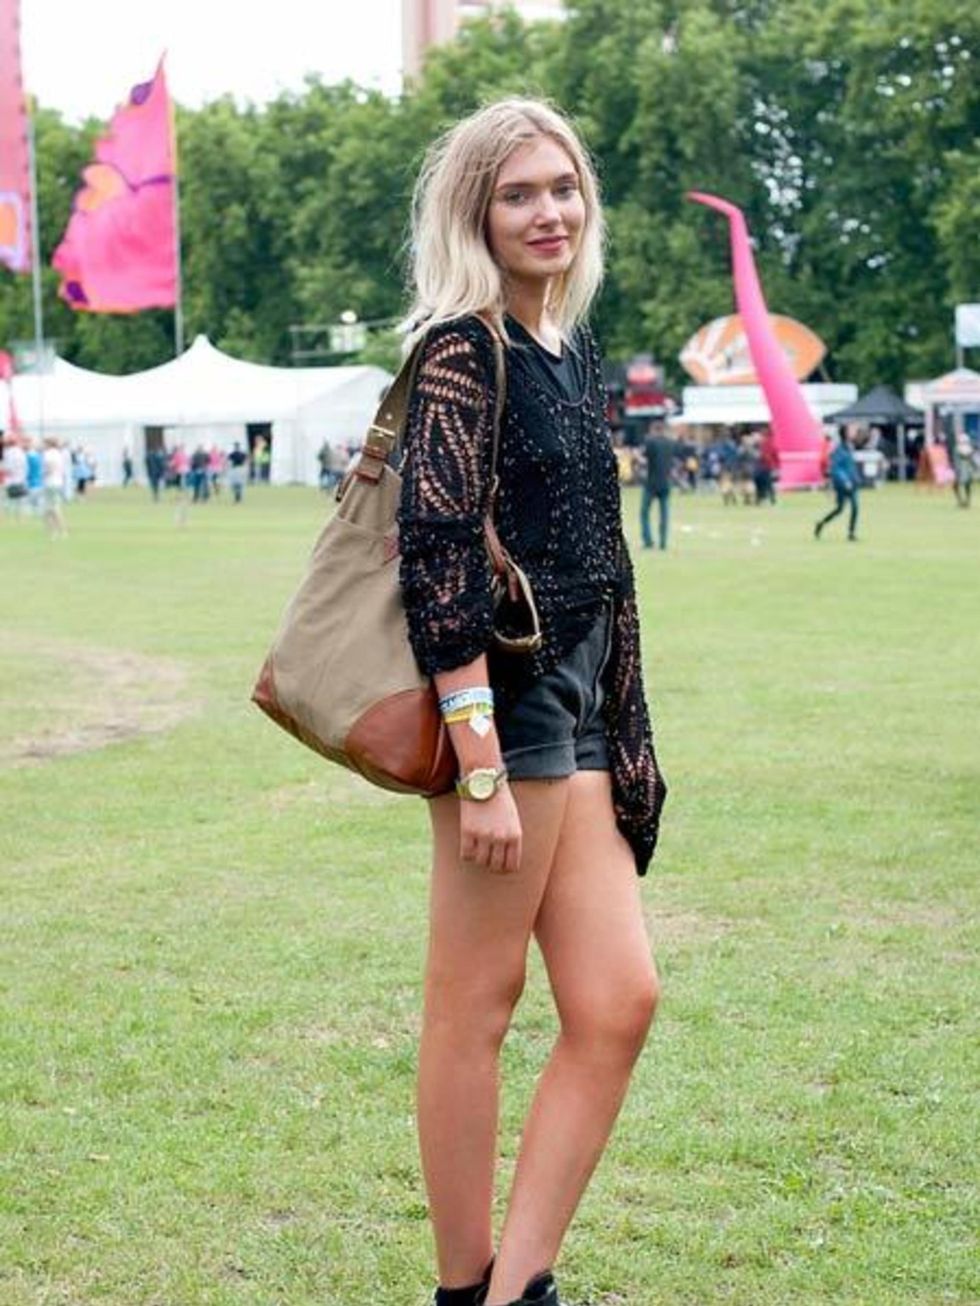 <p>Photo by Kirstin Sinclair.Aishlin, 21, Sales Assistant. Top from charity shop, vintage shorts, Fila trainers, H&amp;M bag.</p><p><a href="http://www.elleuk.com/style/street-style/lovebox-2011">Lovebox Festival</a></p>